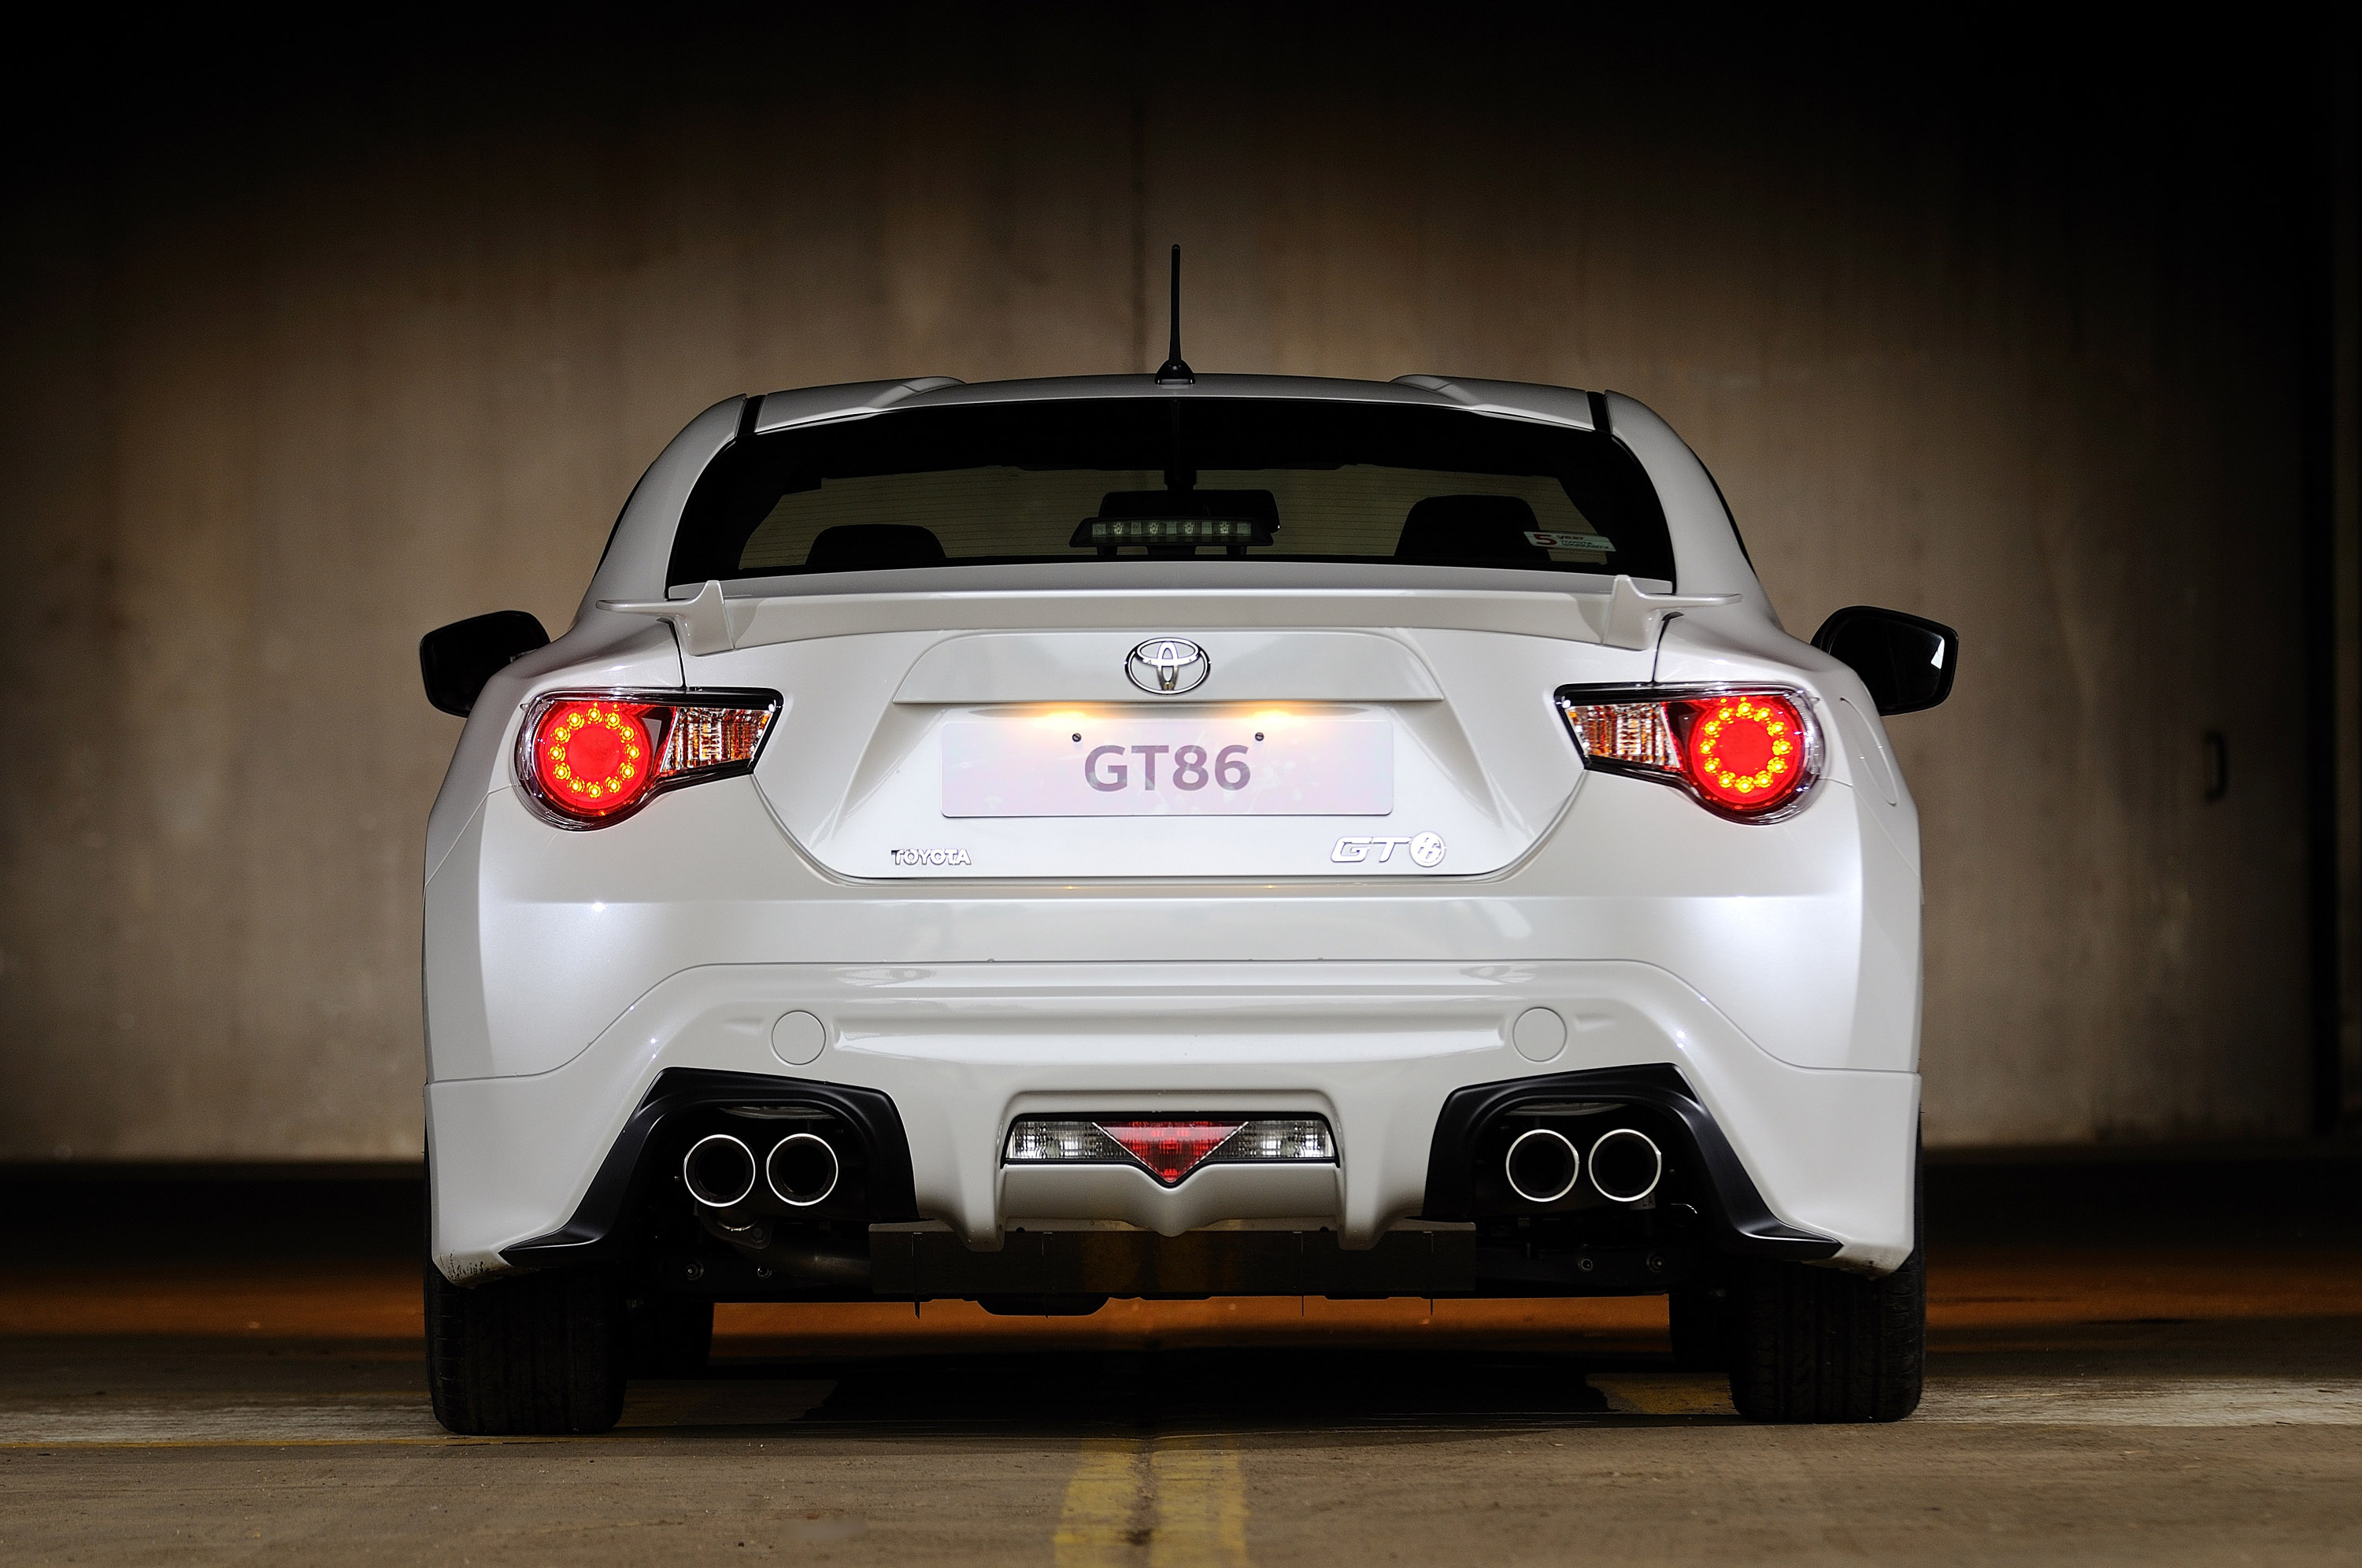 Toyota GT86 TRD (2013) Picture 4 of 6